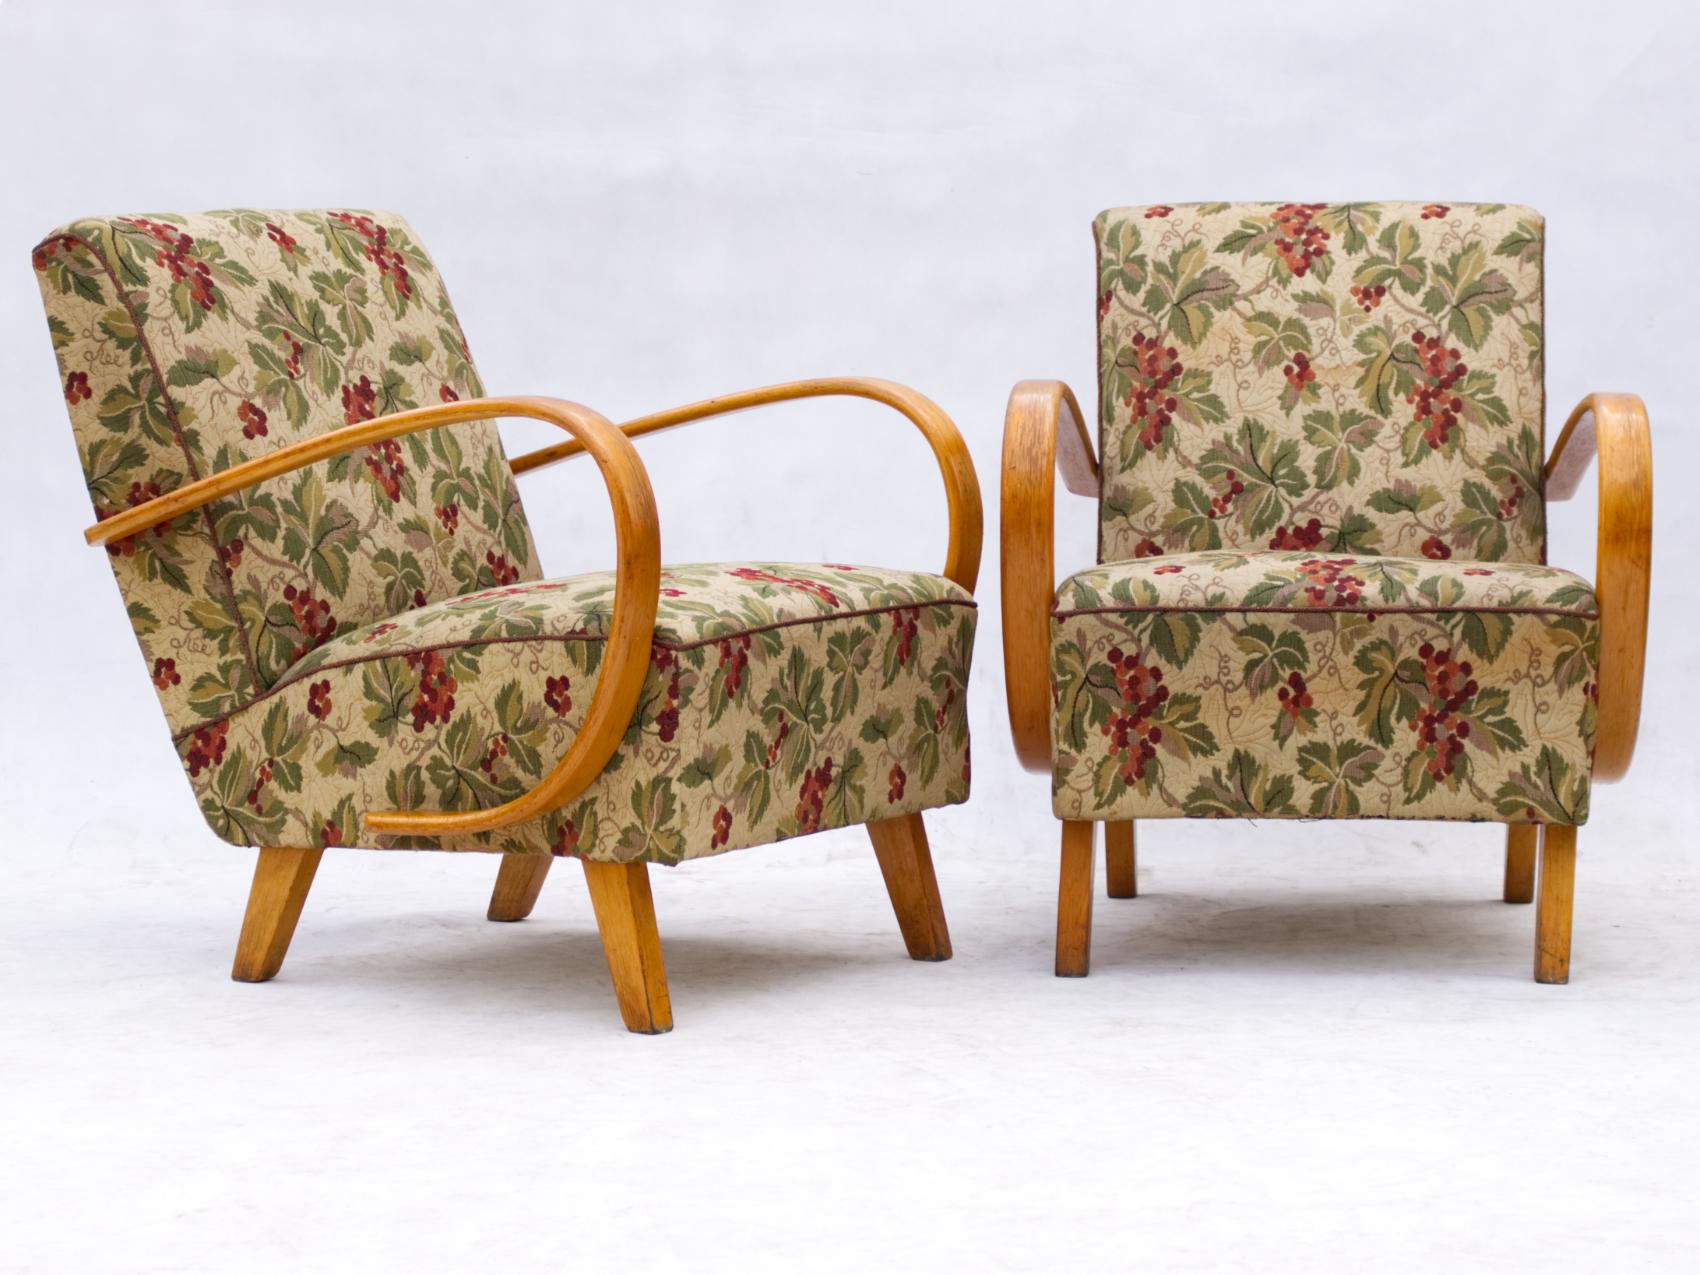 This lounge chairs, model No. 2, were designed by Jindrich Halabala and produced in Czechoslovakia in the 1930s by UP Zavody Brno. The chairs features curved armrests and legs made from stained beech and are upholstered in original fabric. The